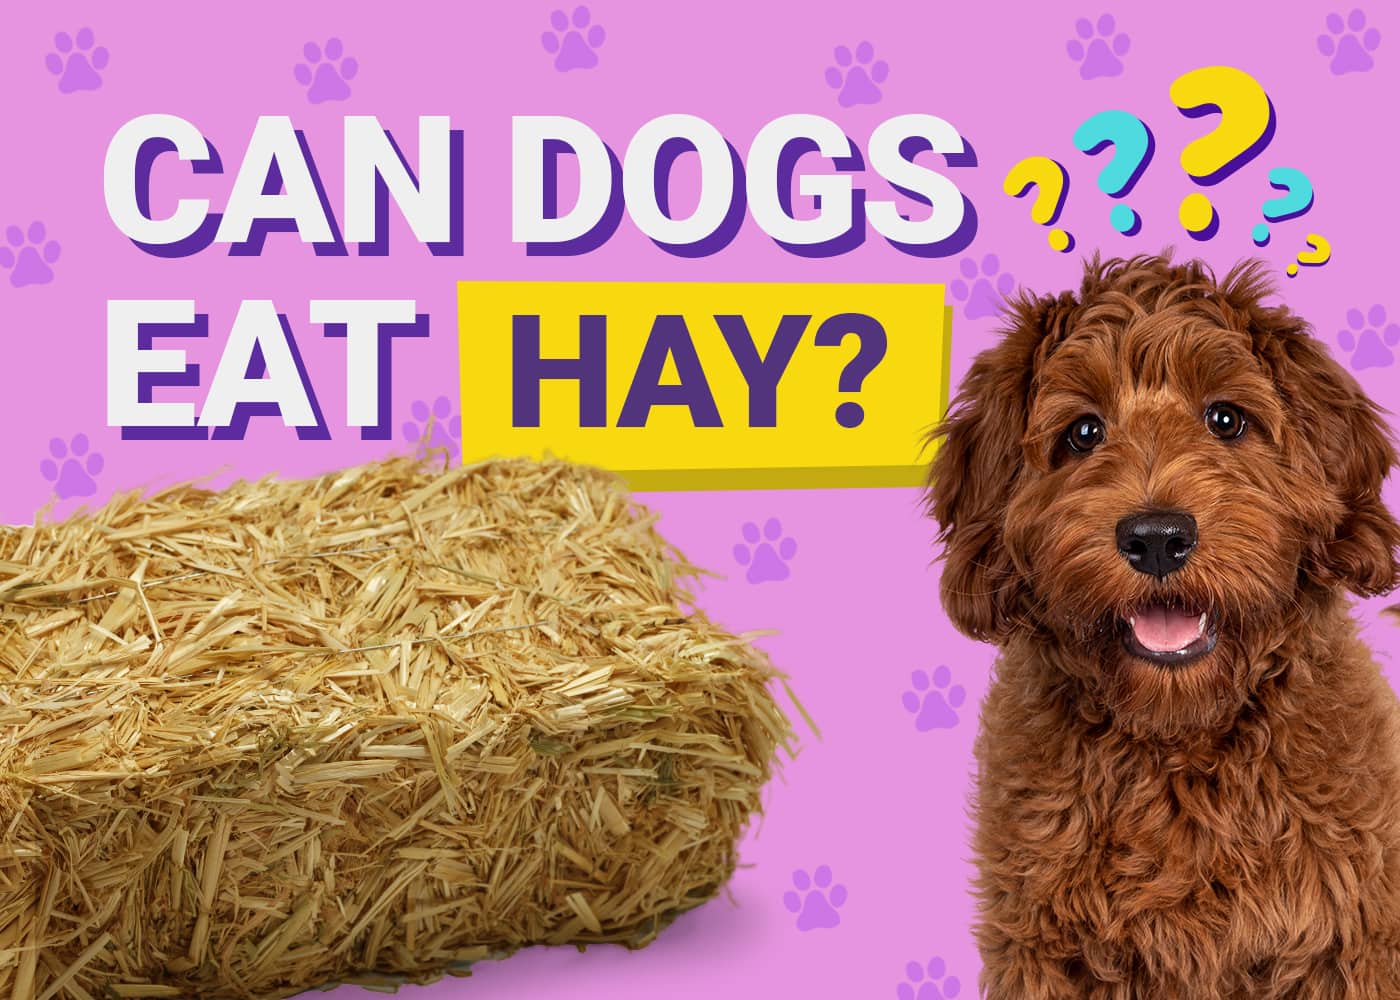 Can Dogs Eat_hay